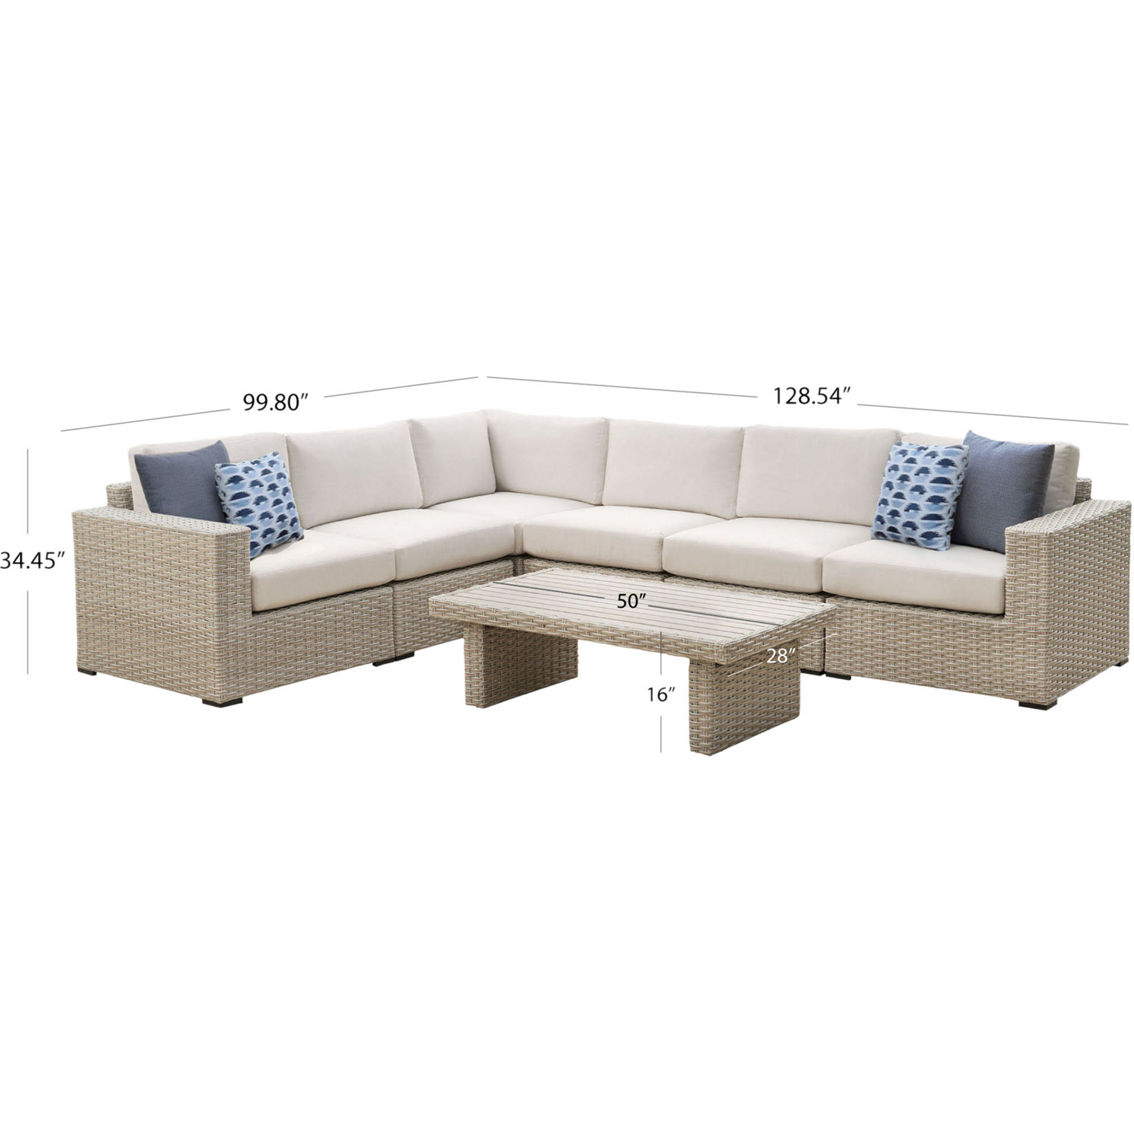 Abbyson Villa 7 pc. Outdoor Wicker Sectional with Sunbrella Fabric, Natural - Image 9 of 9